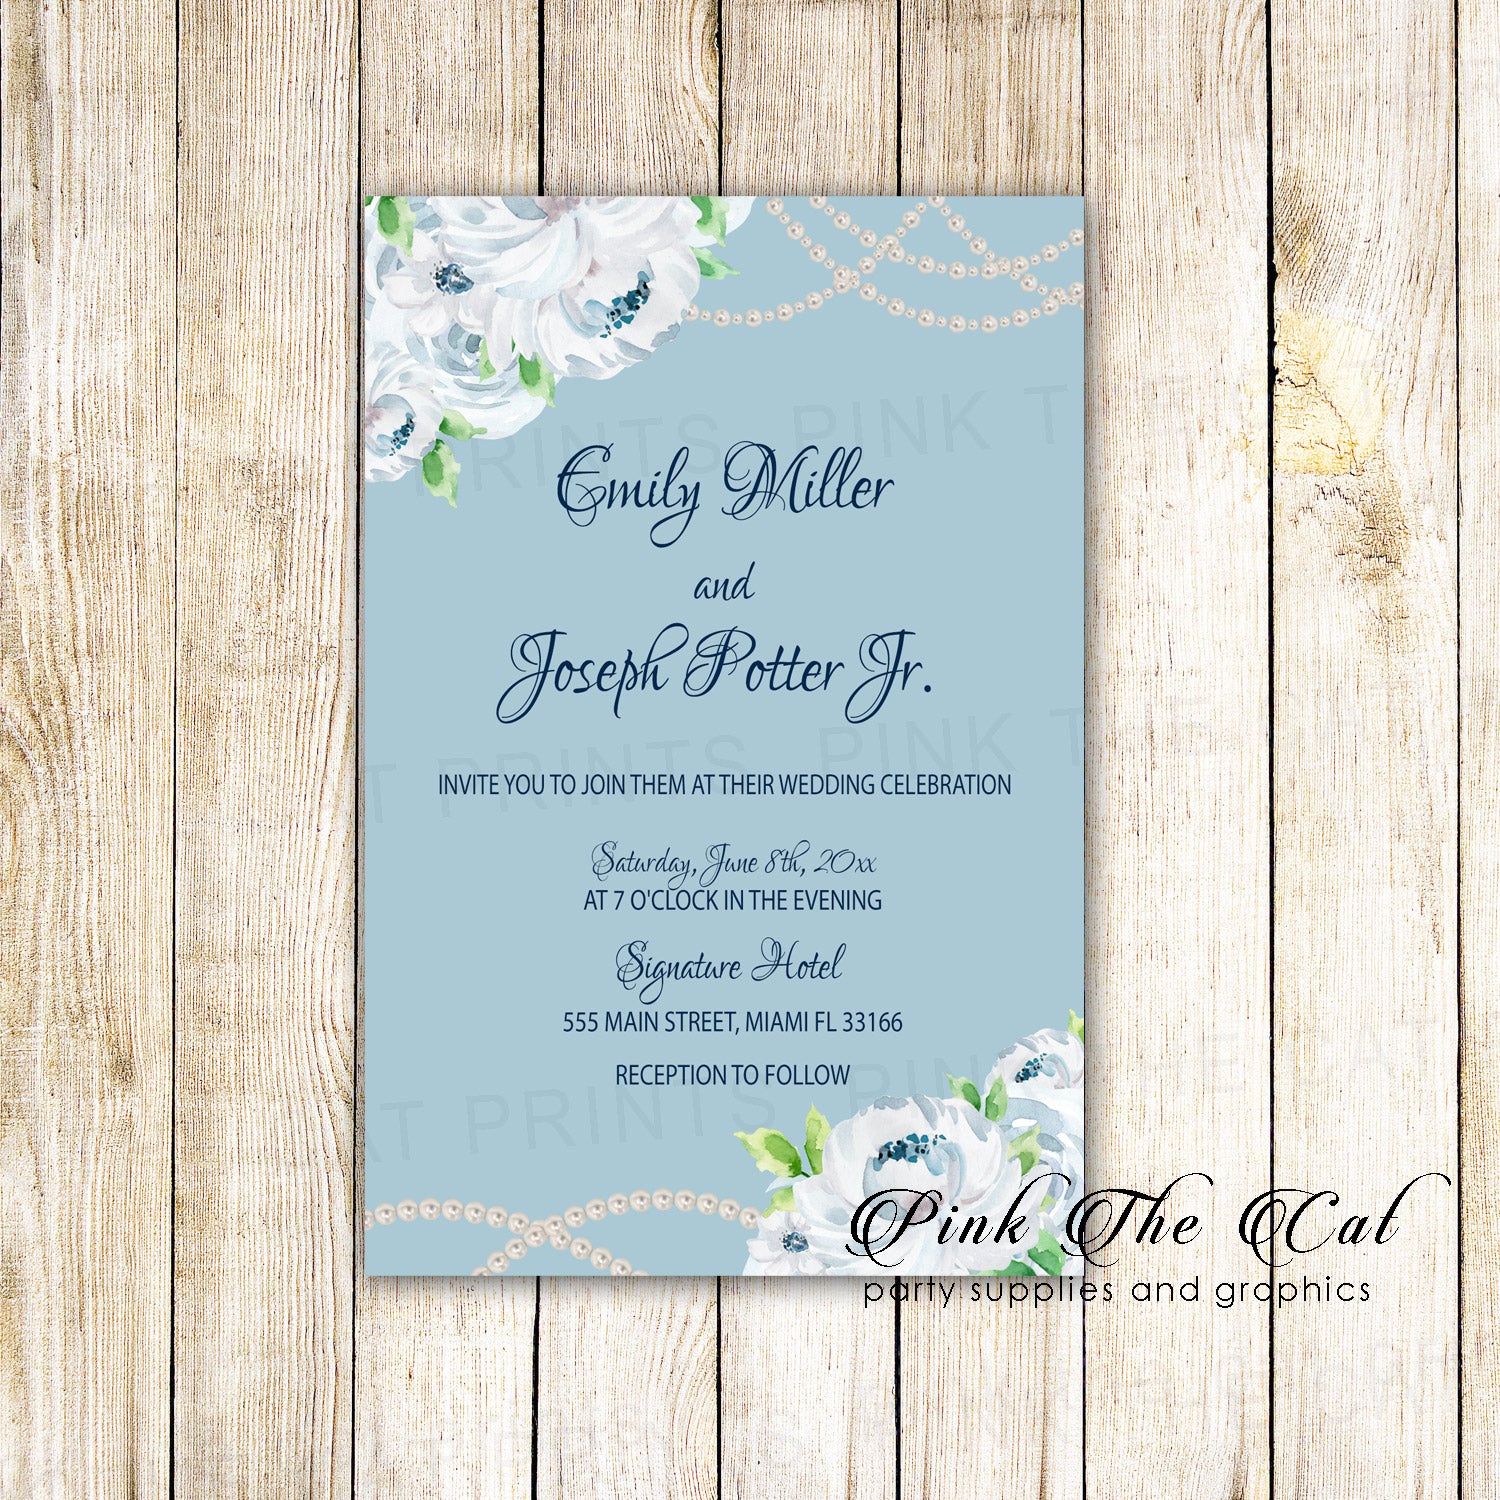 Wedding invitations blue white roses pearls floral printable